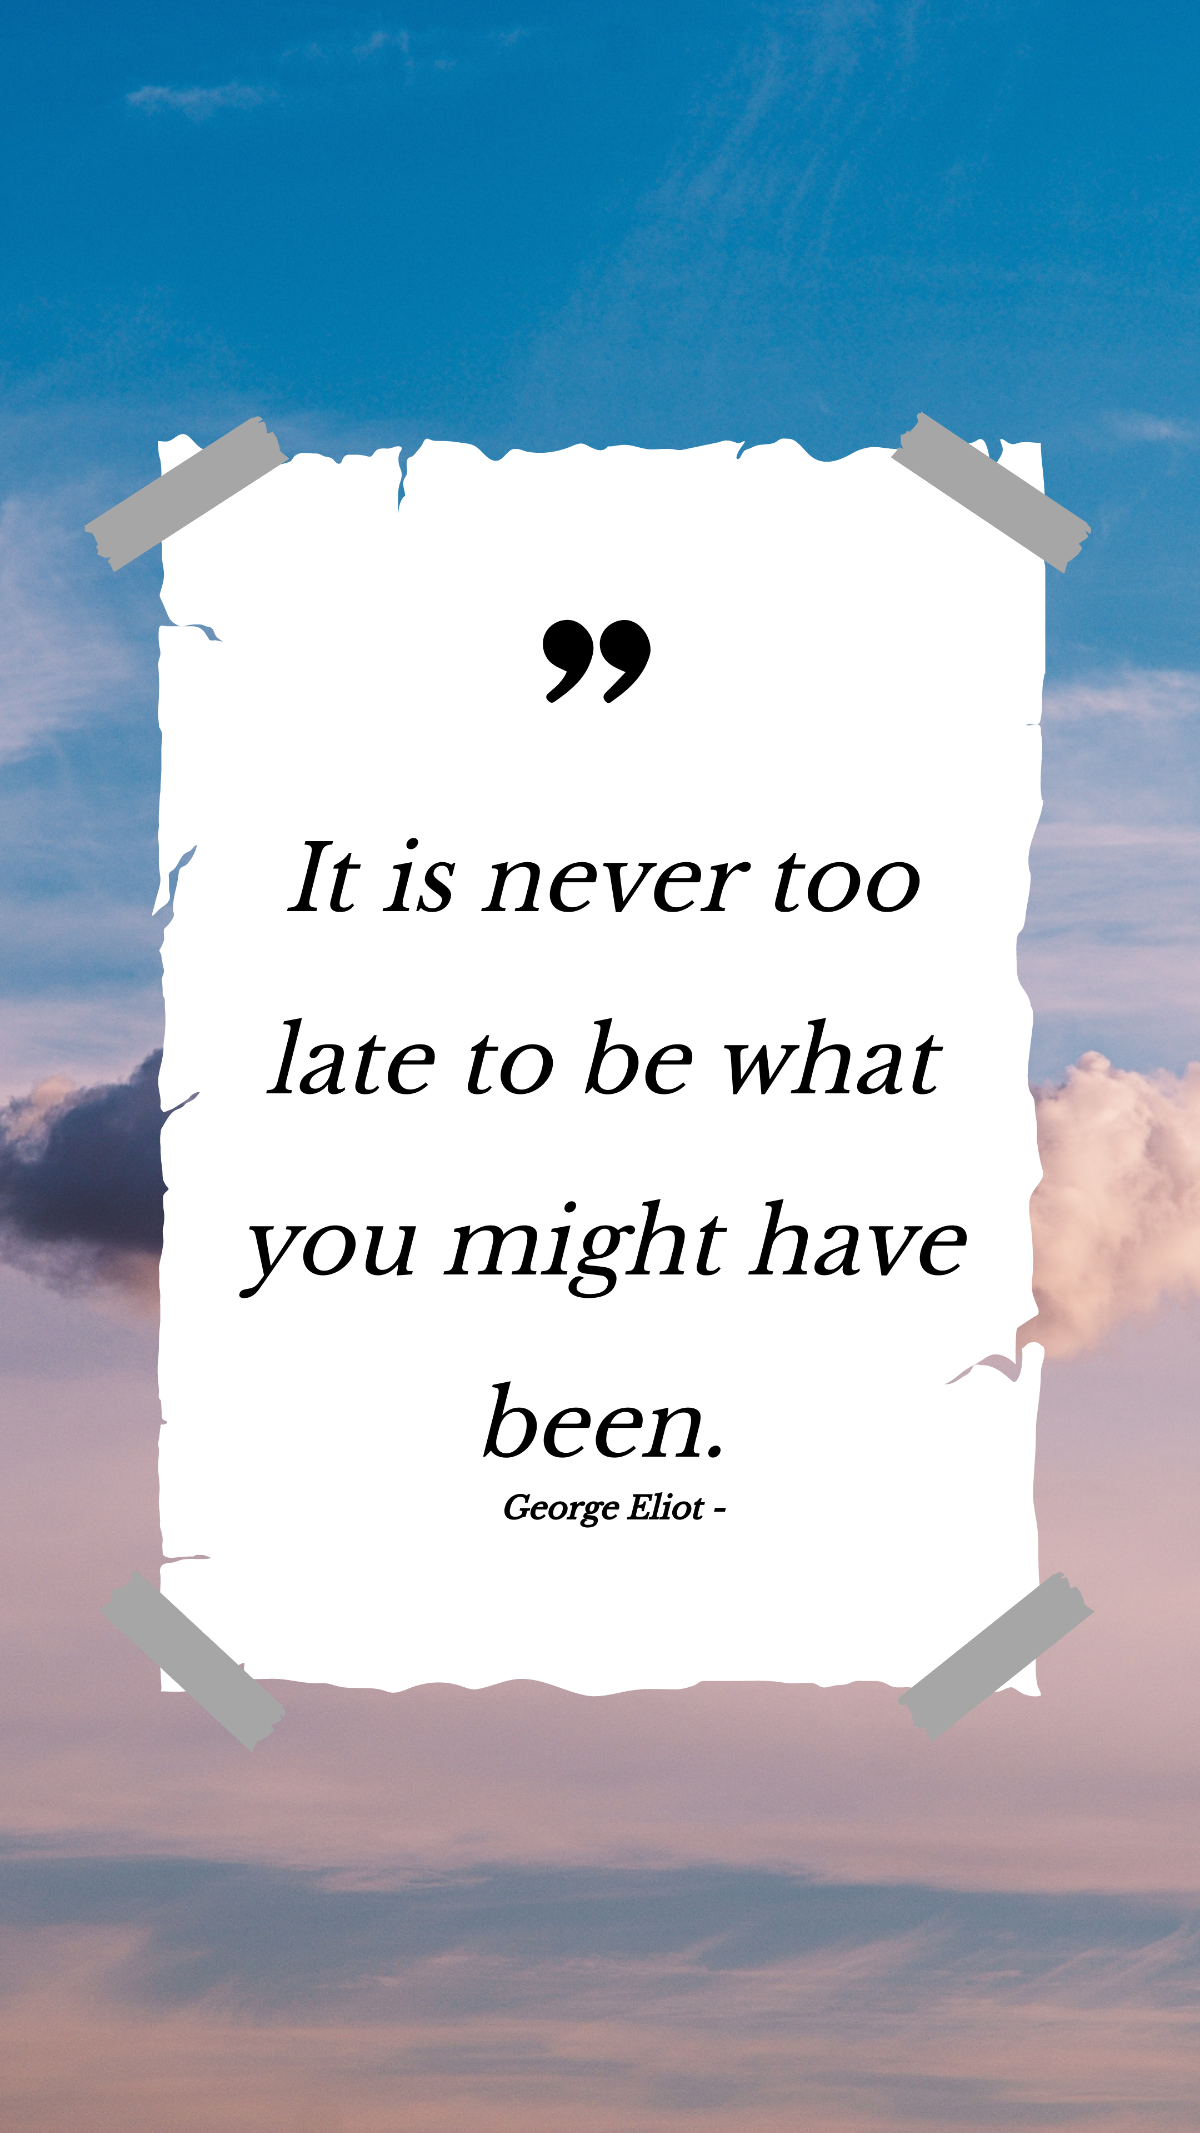 George Eliot - It is never too late to be what you might have been. Template